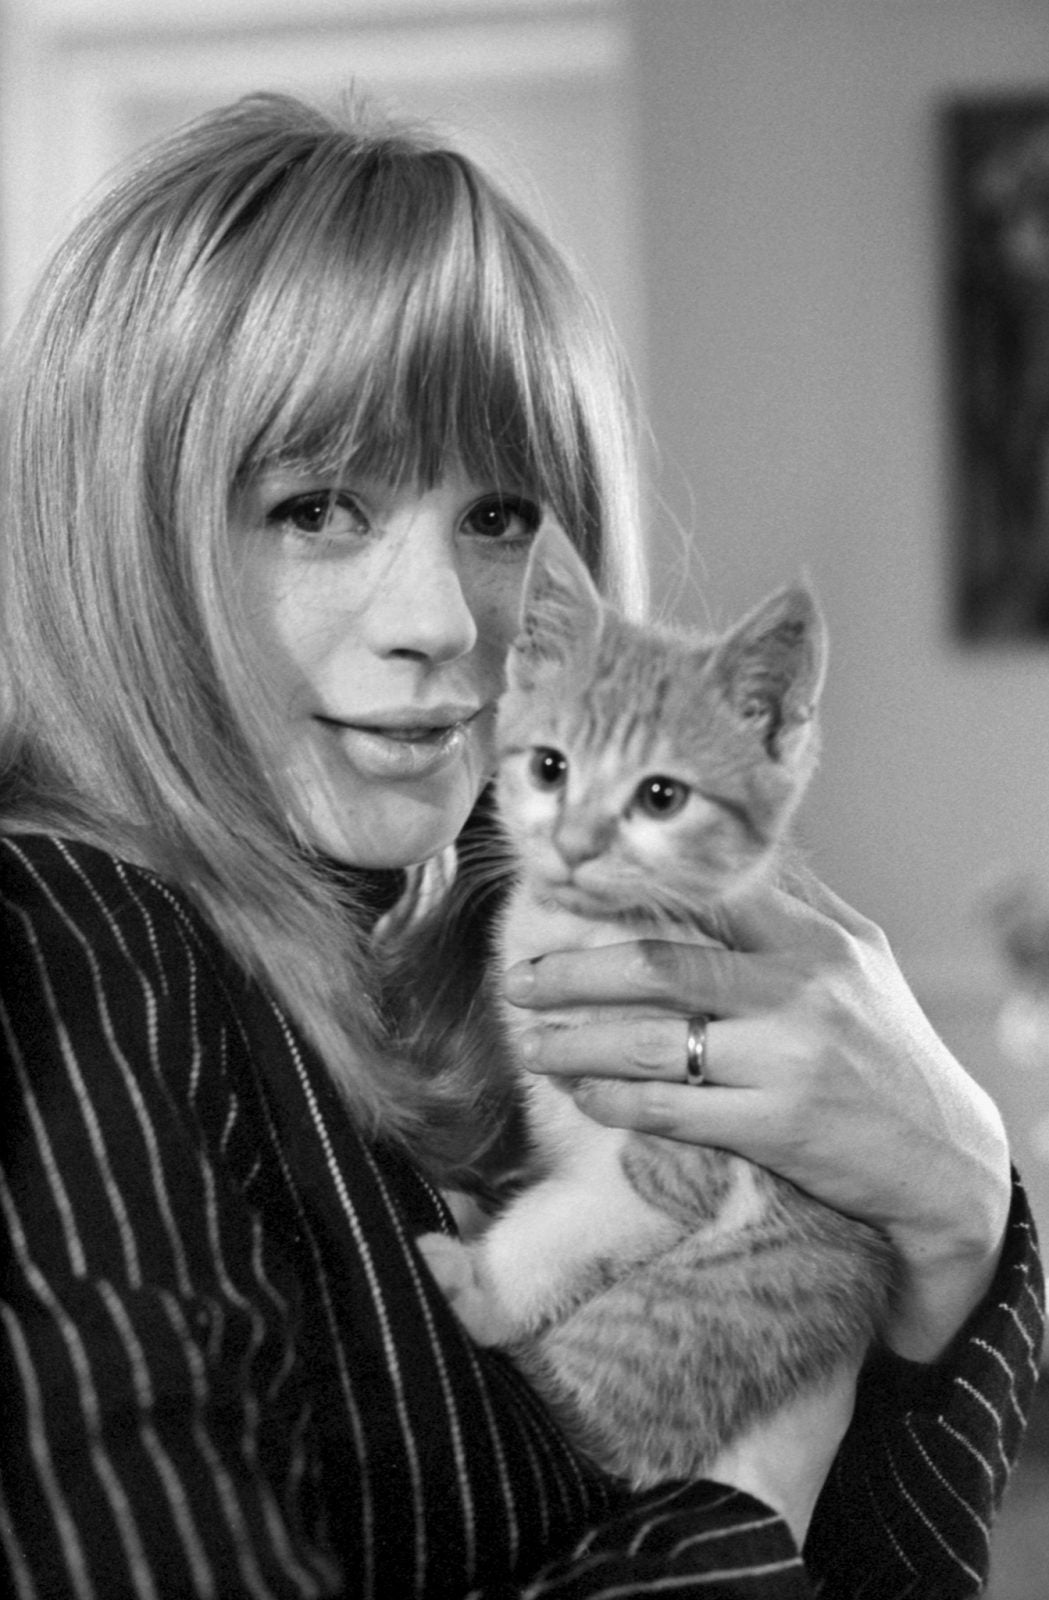 A lady named Marianne and a ginger and white kitten in her arms